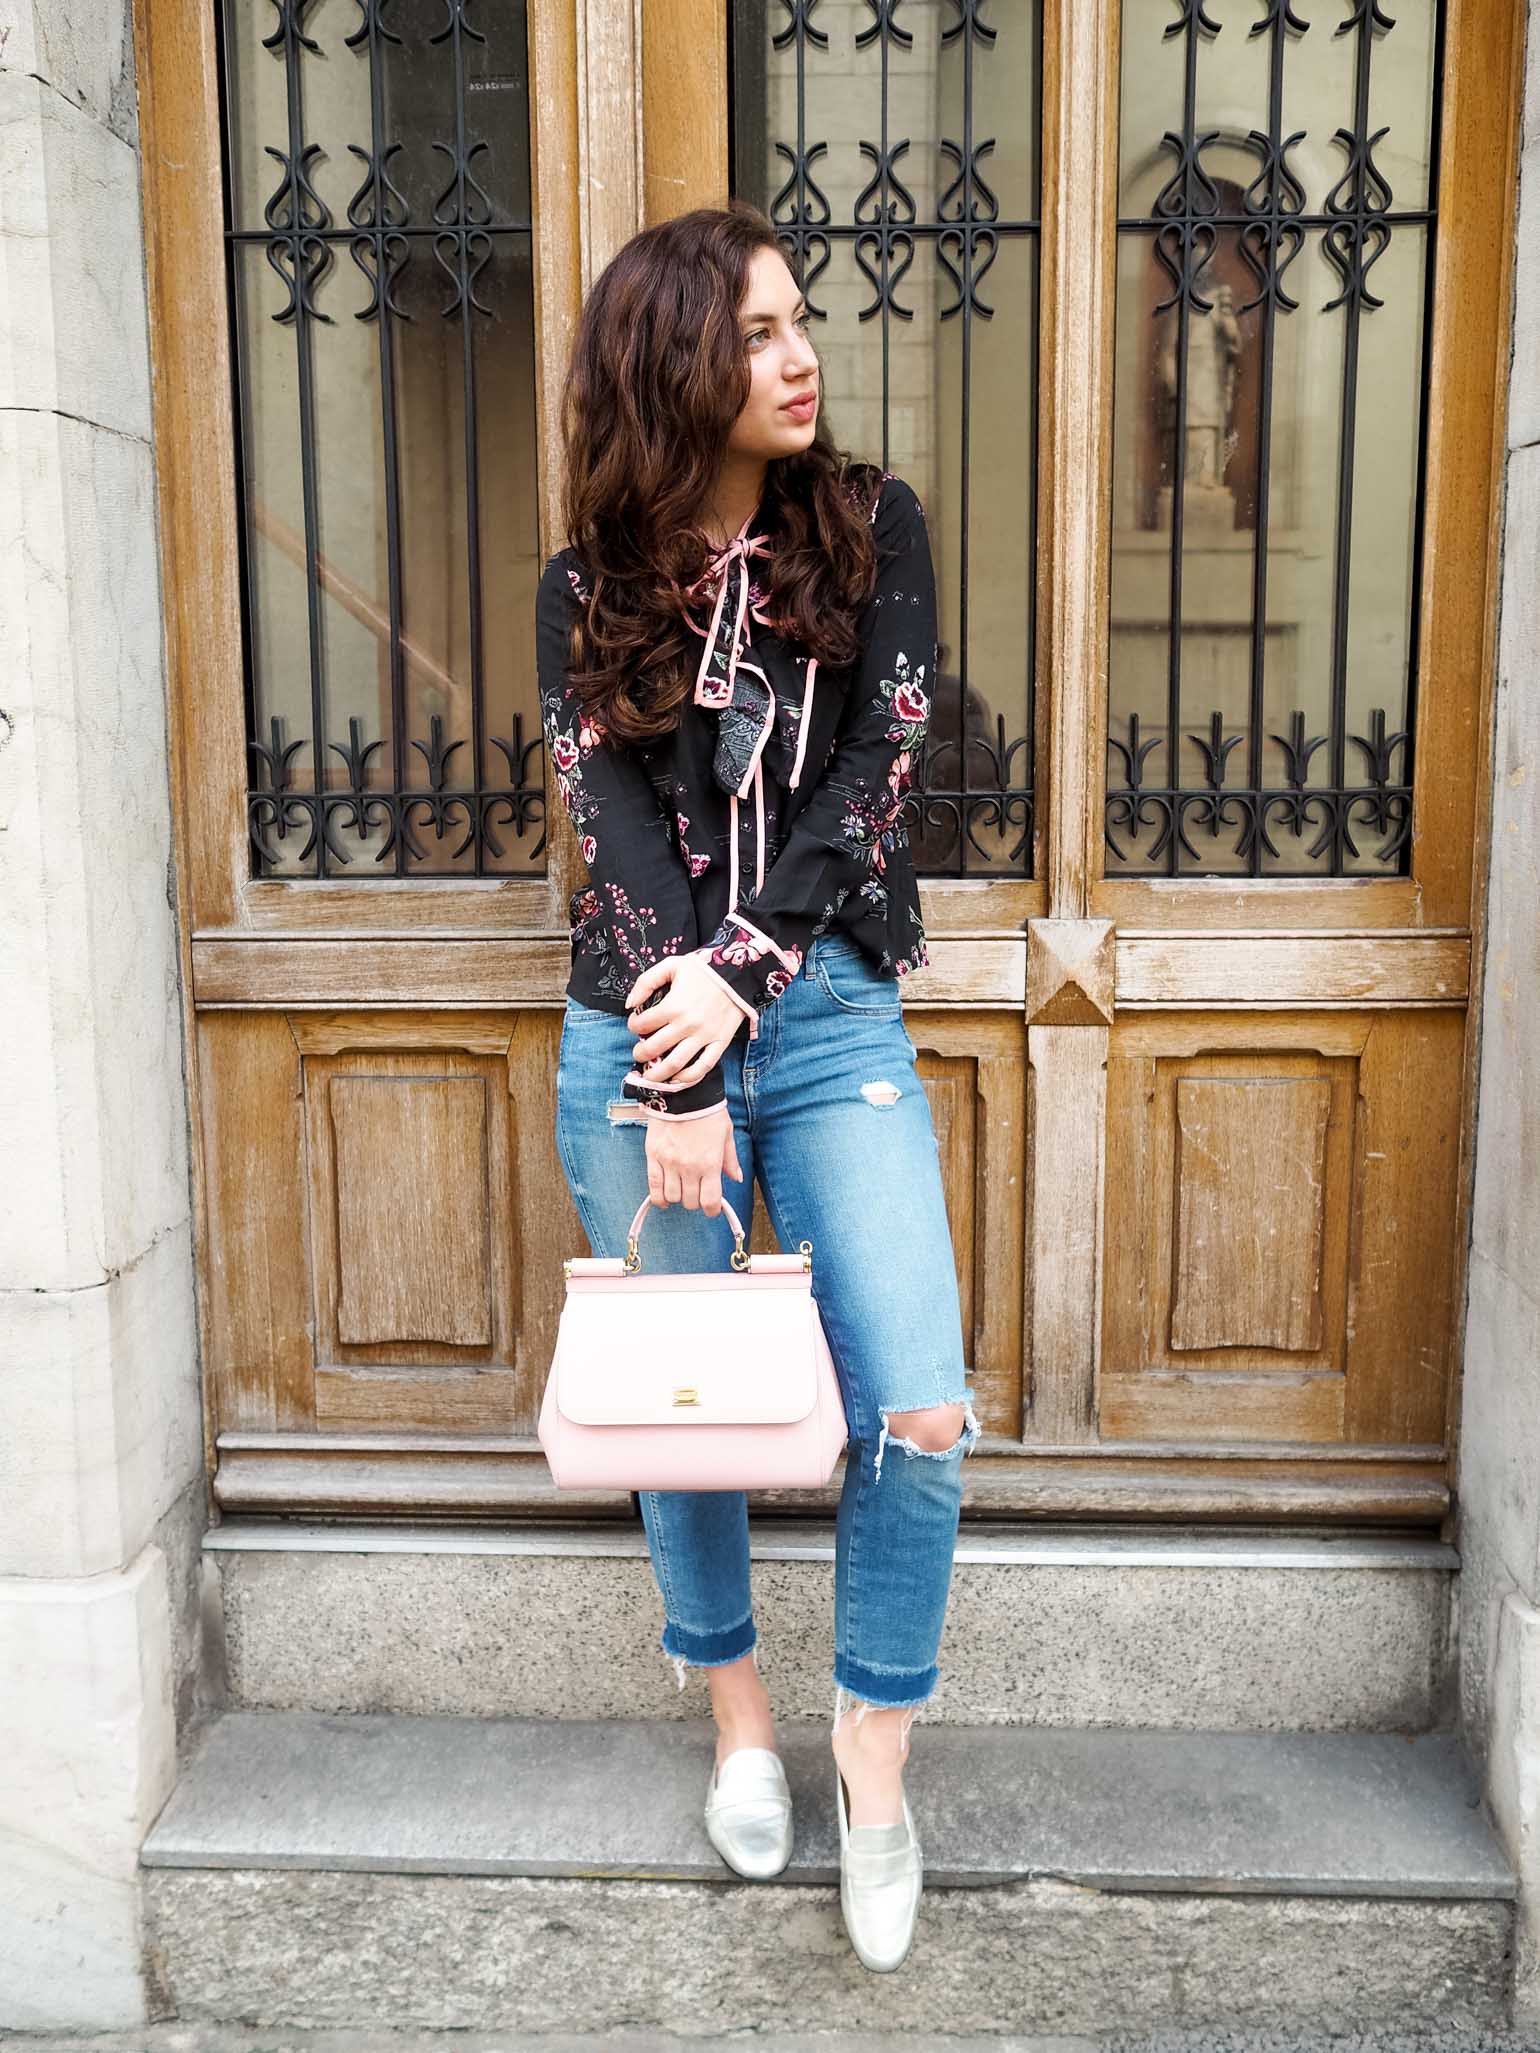 Shop the best floral blouses for Spring under $100 - Dallas fashion blogger